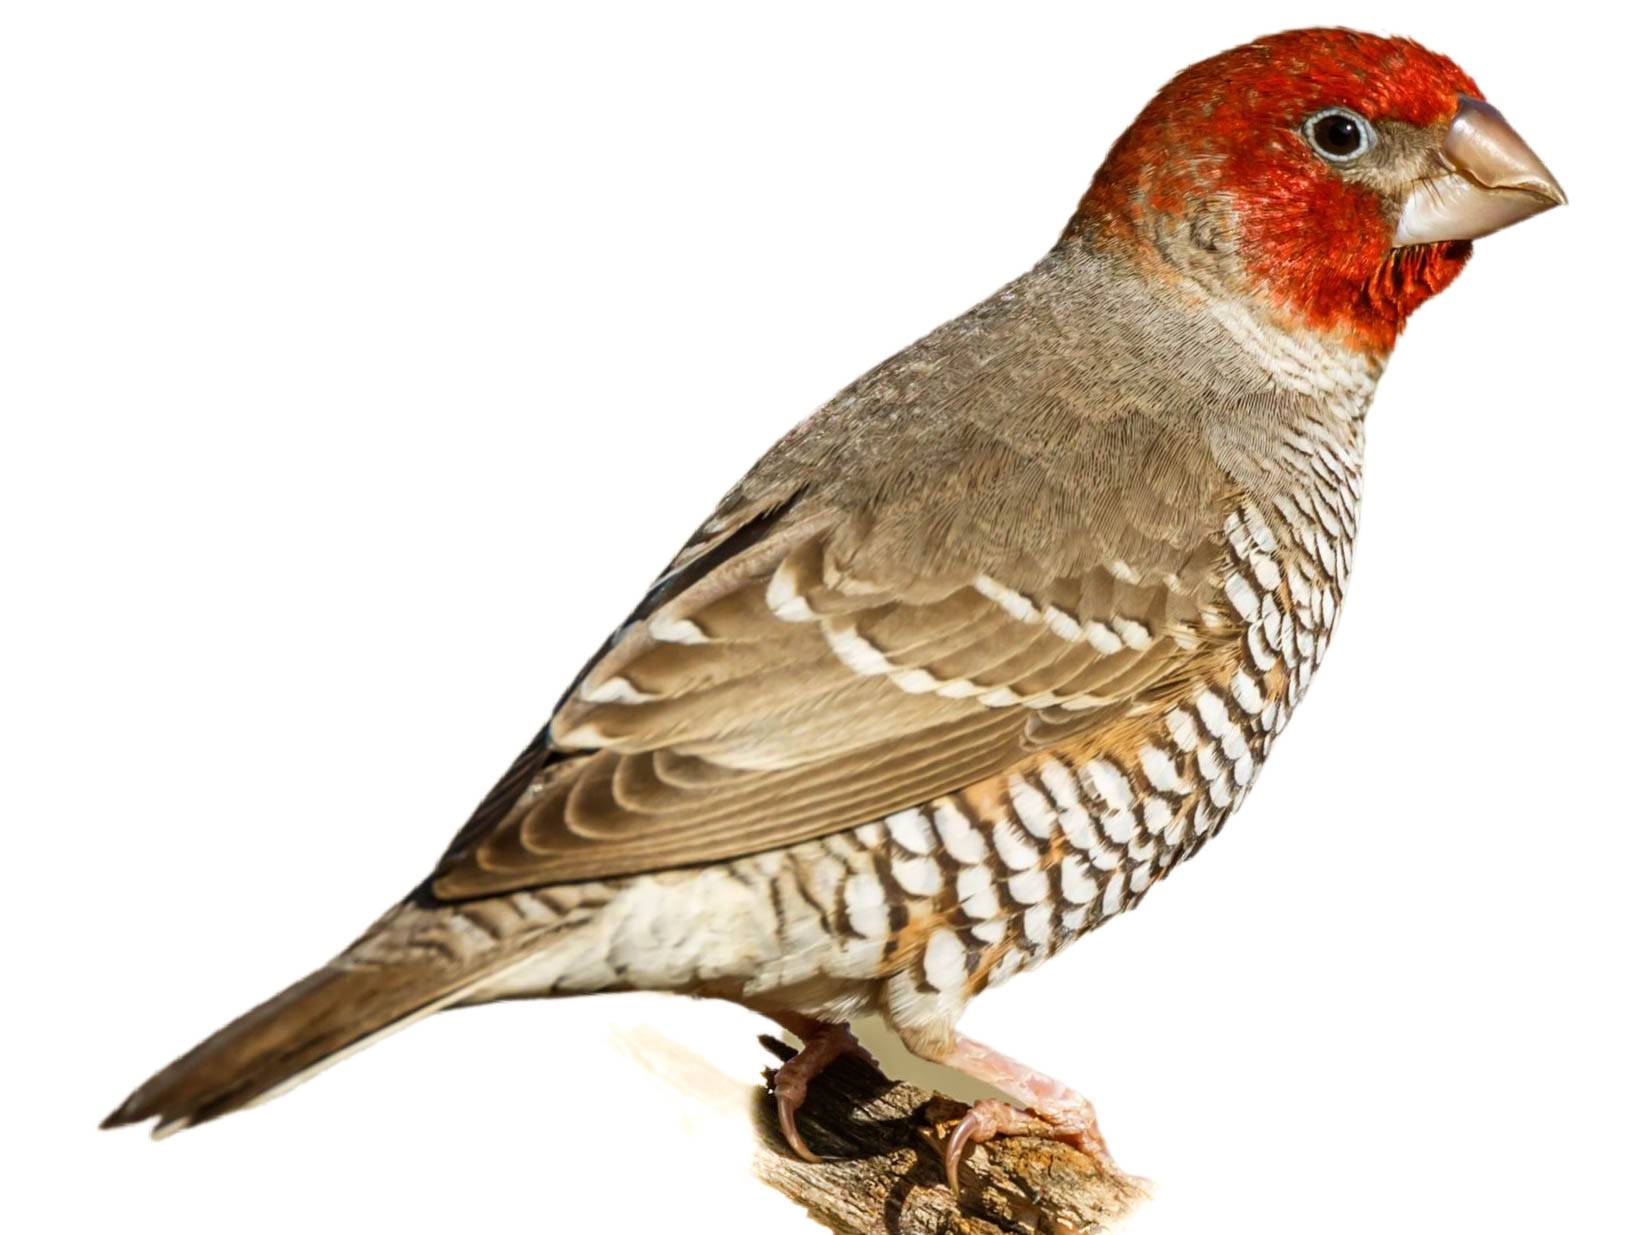 A photo of a Red-headed Finch (Amadina erythrocephala), male